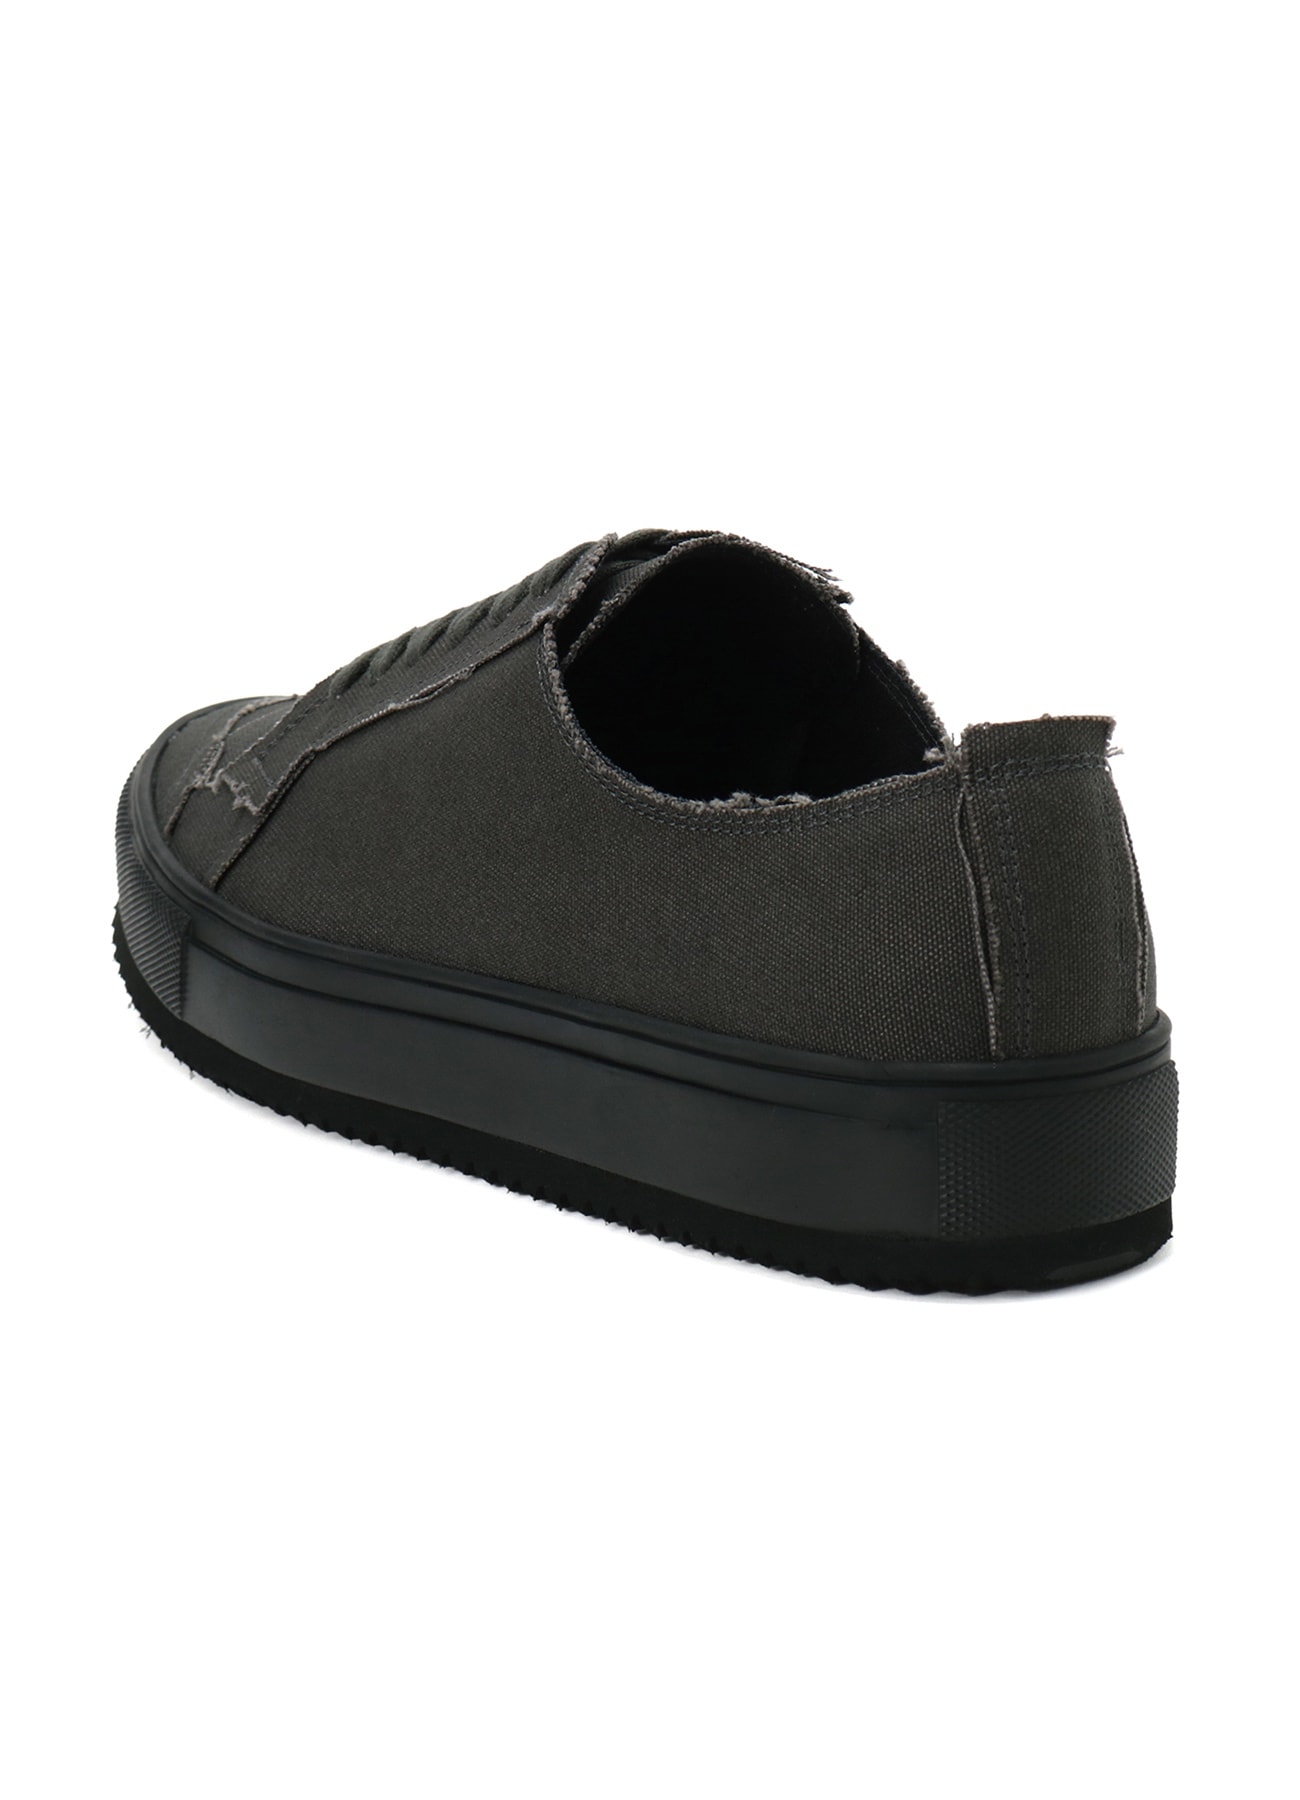 C/9 CANVAS A LOW TOP SNEAKER A